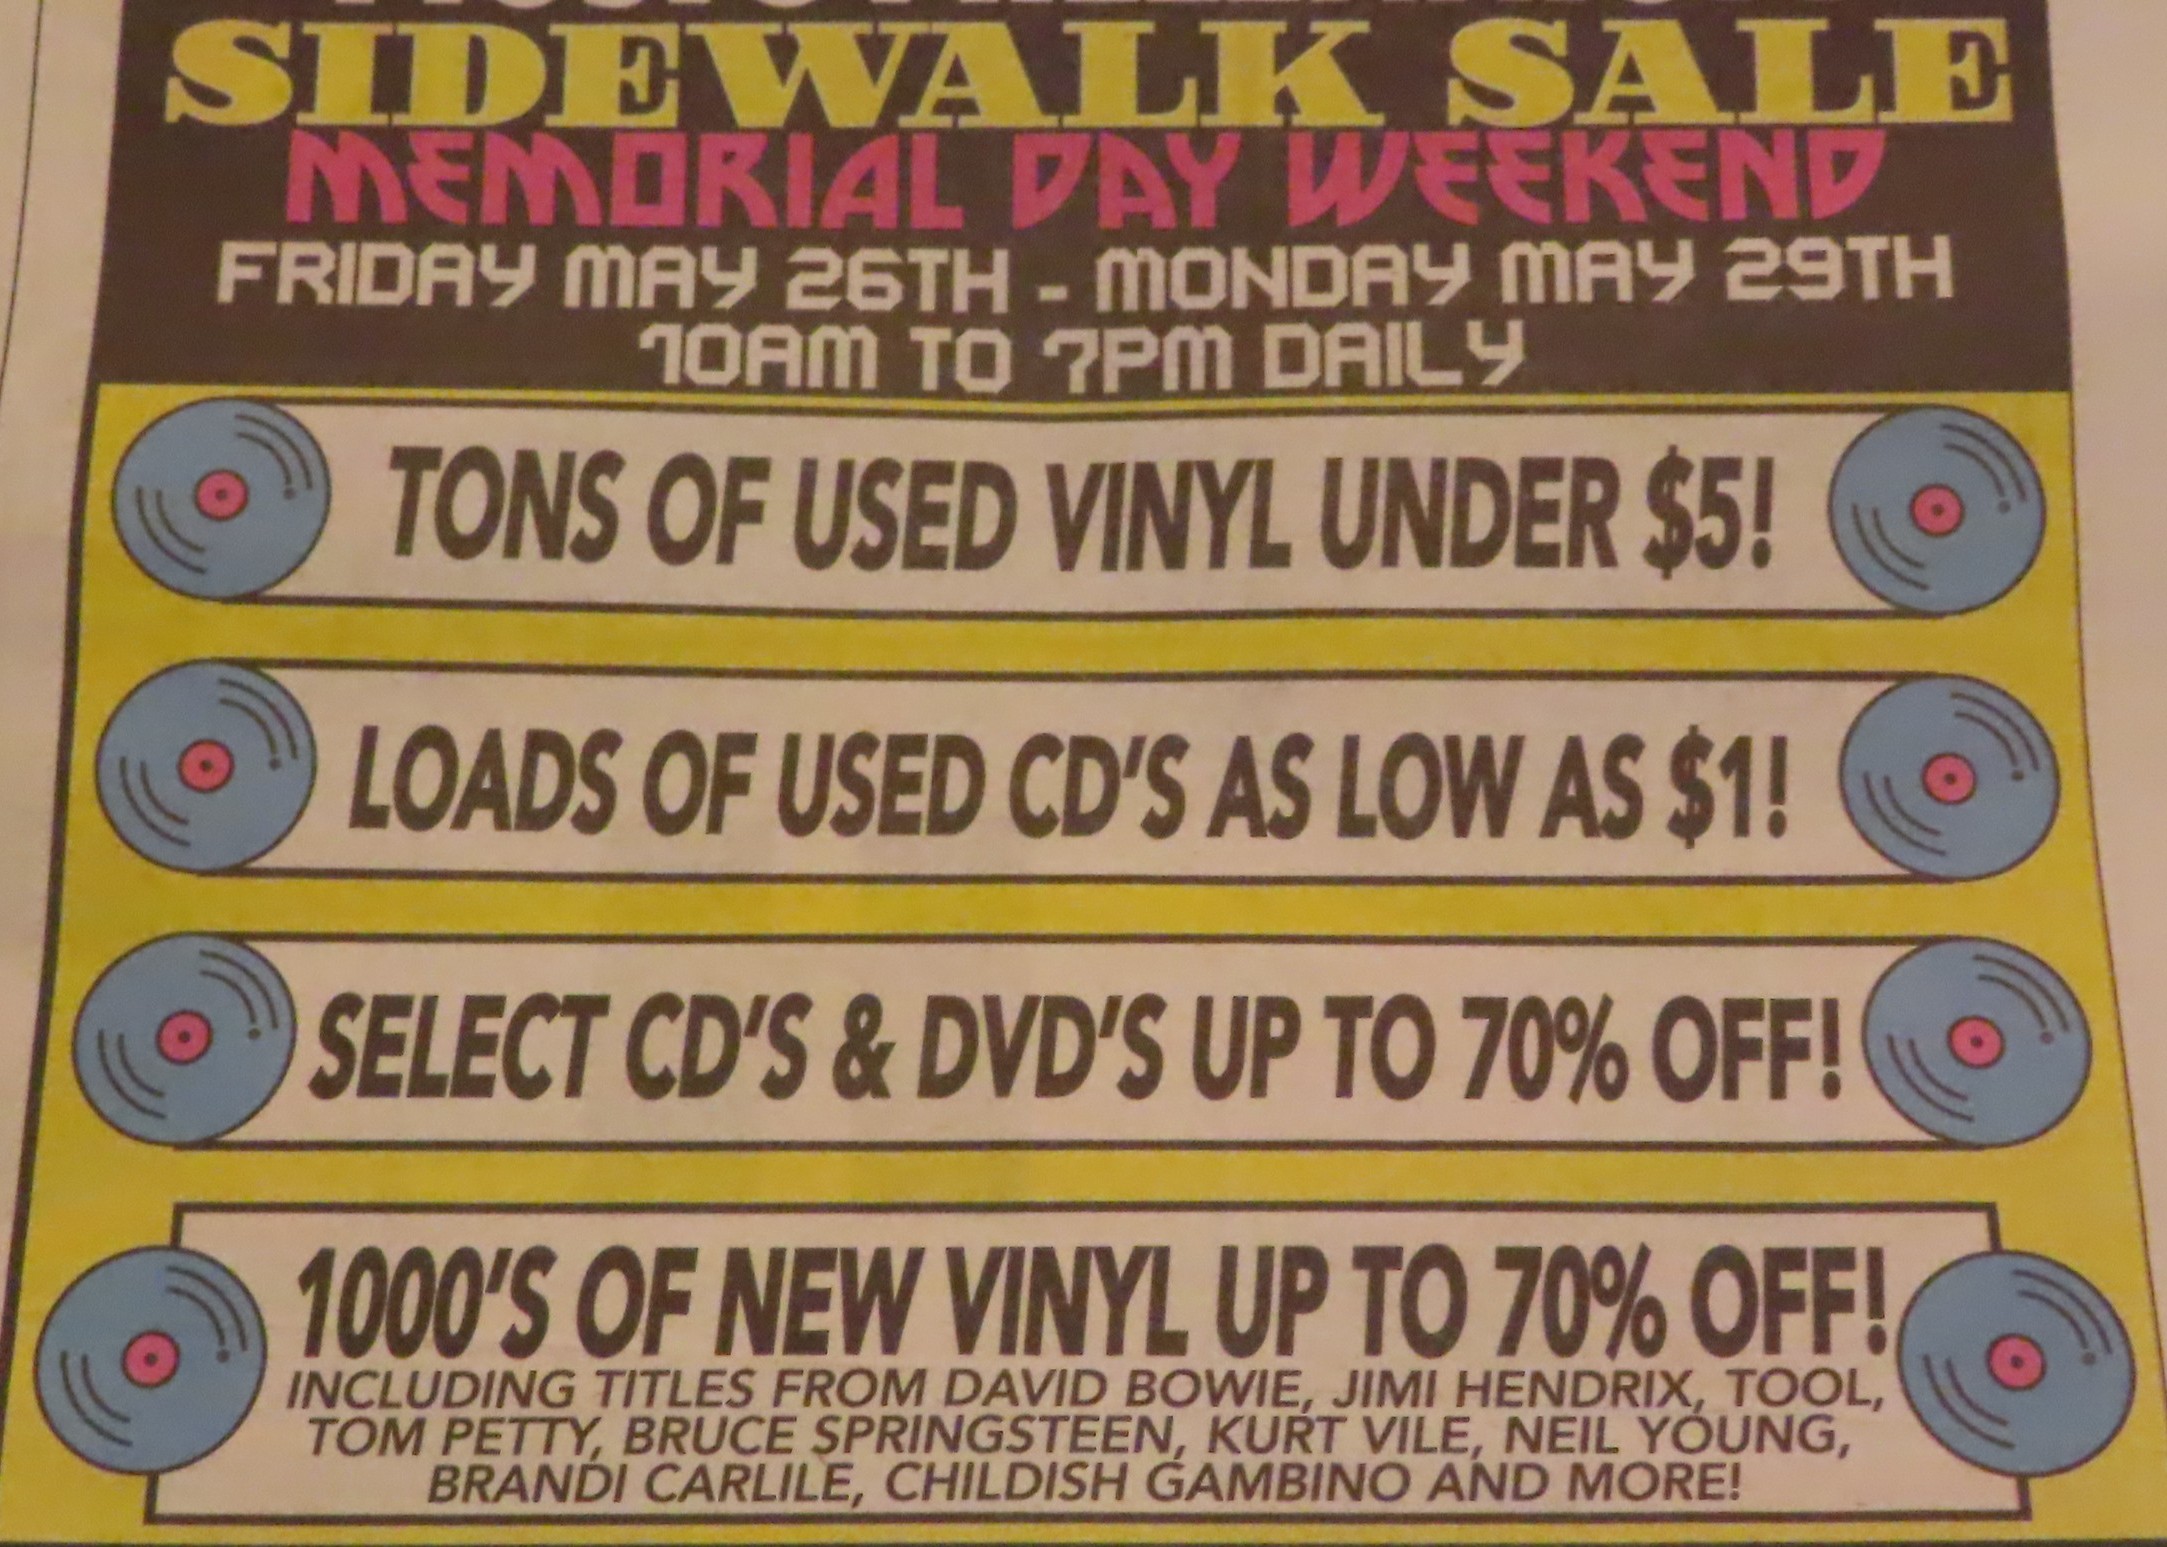 Newpaper ad for a memorial day CD and vinyl sale